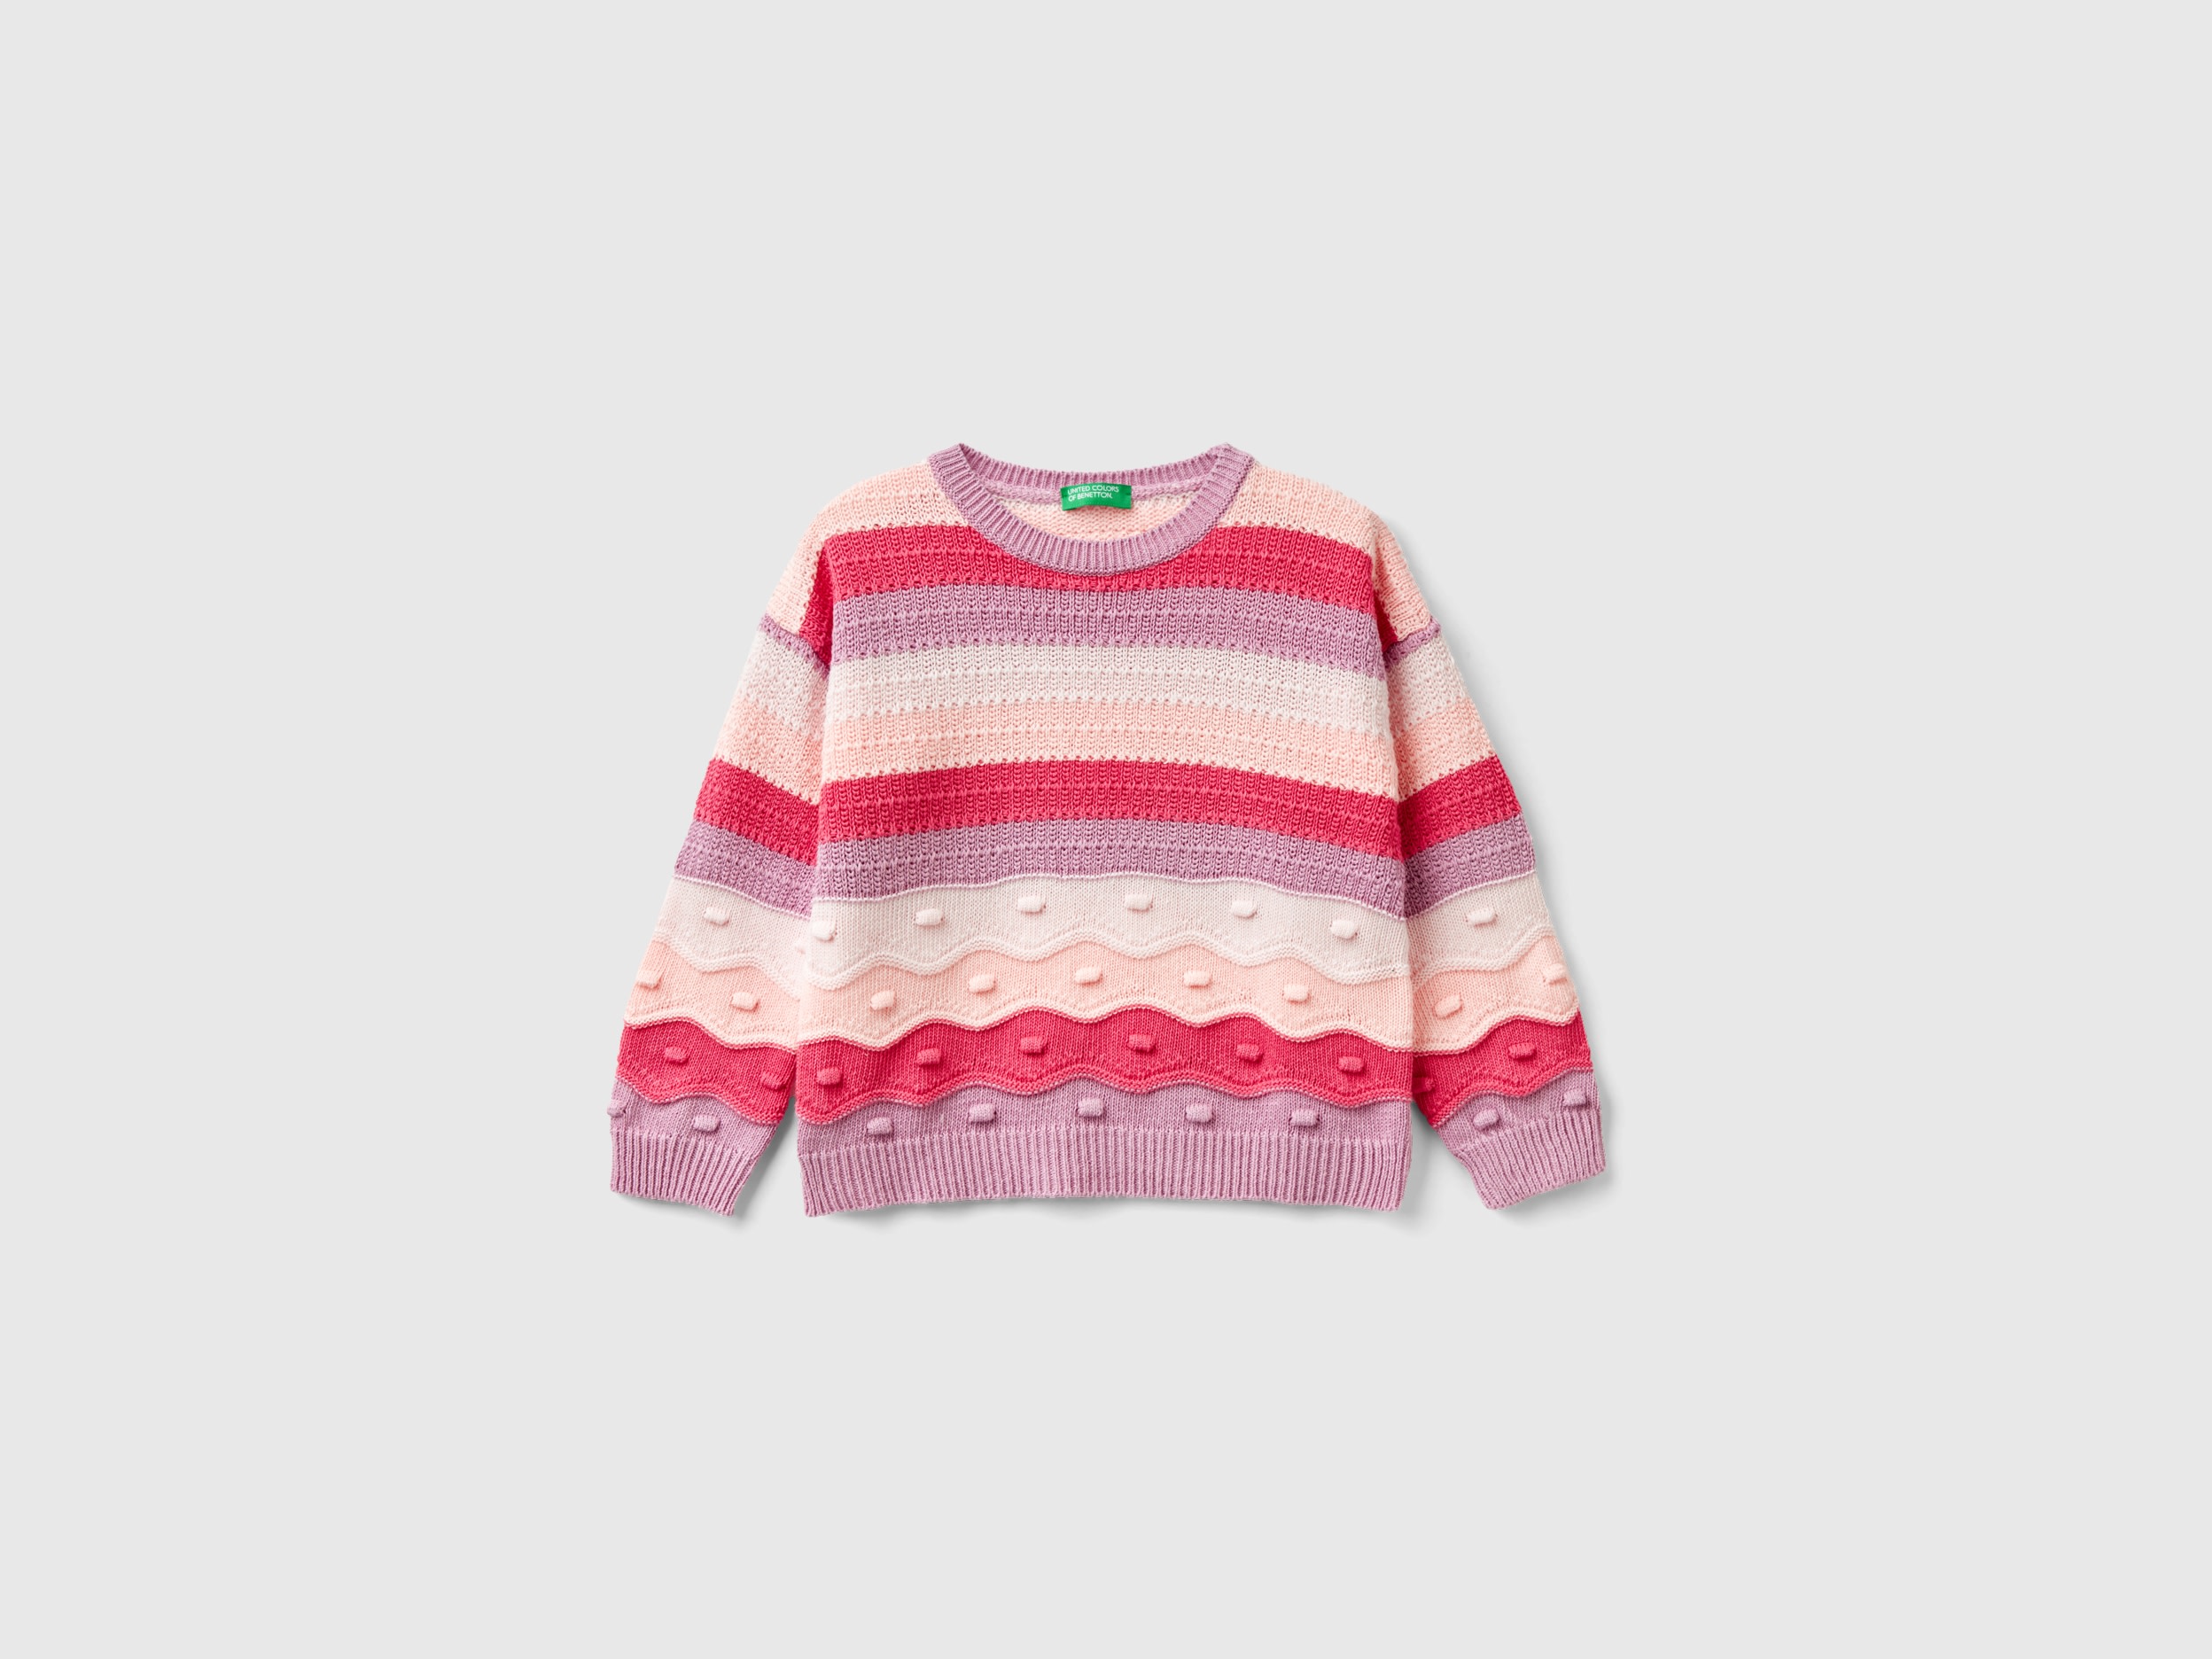 Image of Benetton, Striped Sweater In Recycled Cotton Blend, size 98, Multi-color, Kids